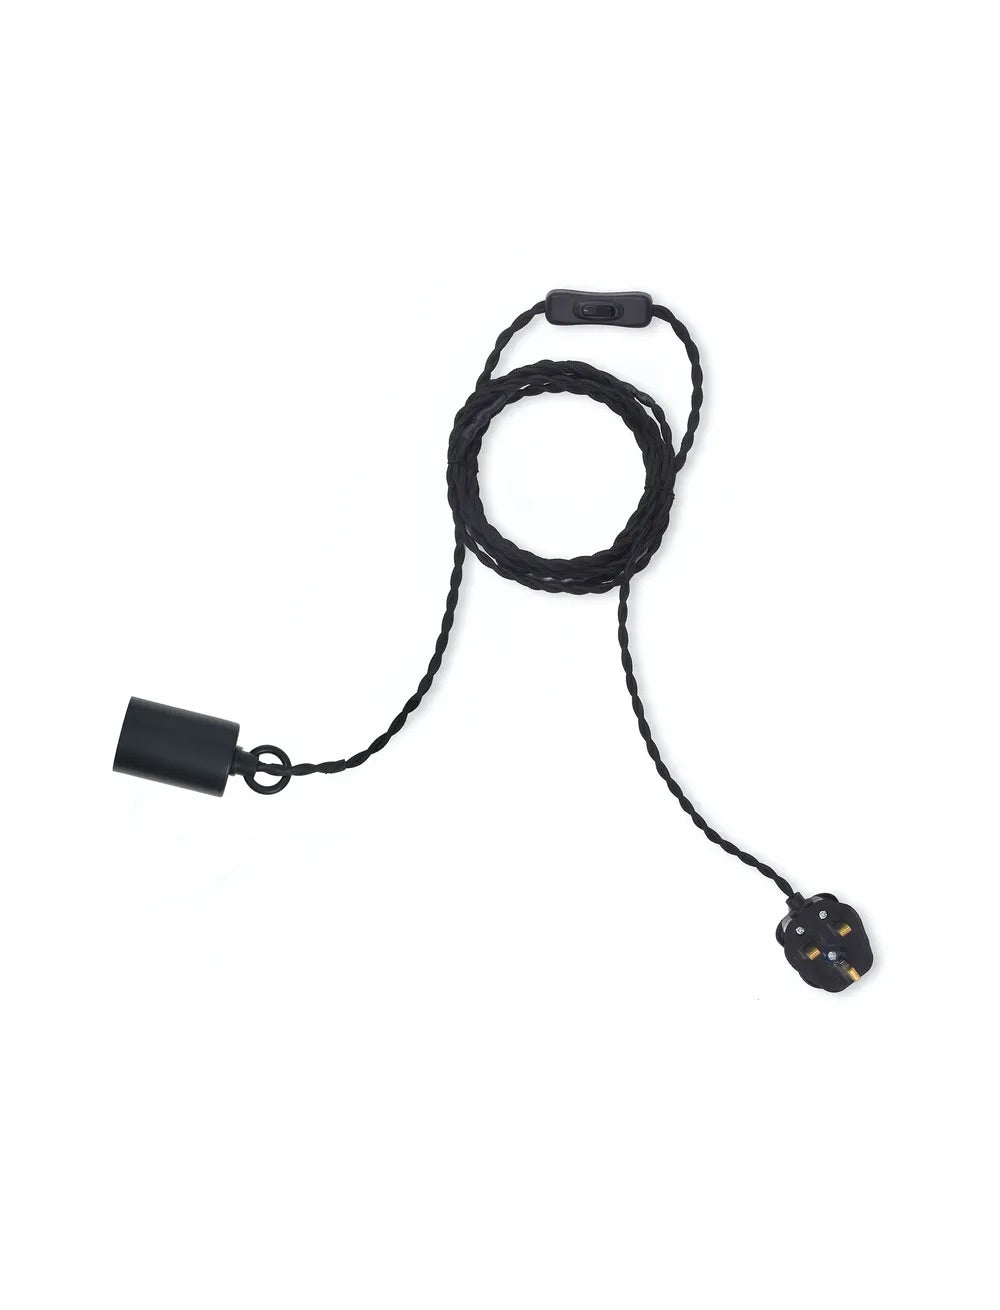 Soho-carbon-wall-light-black-cable-light-bulb-fitting-powder-coated-steel-lenght-2.5m-250cm-Mrs-Robinson